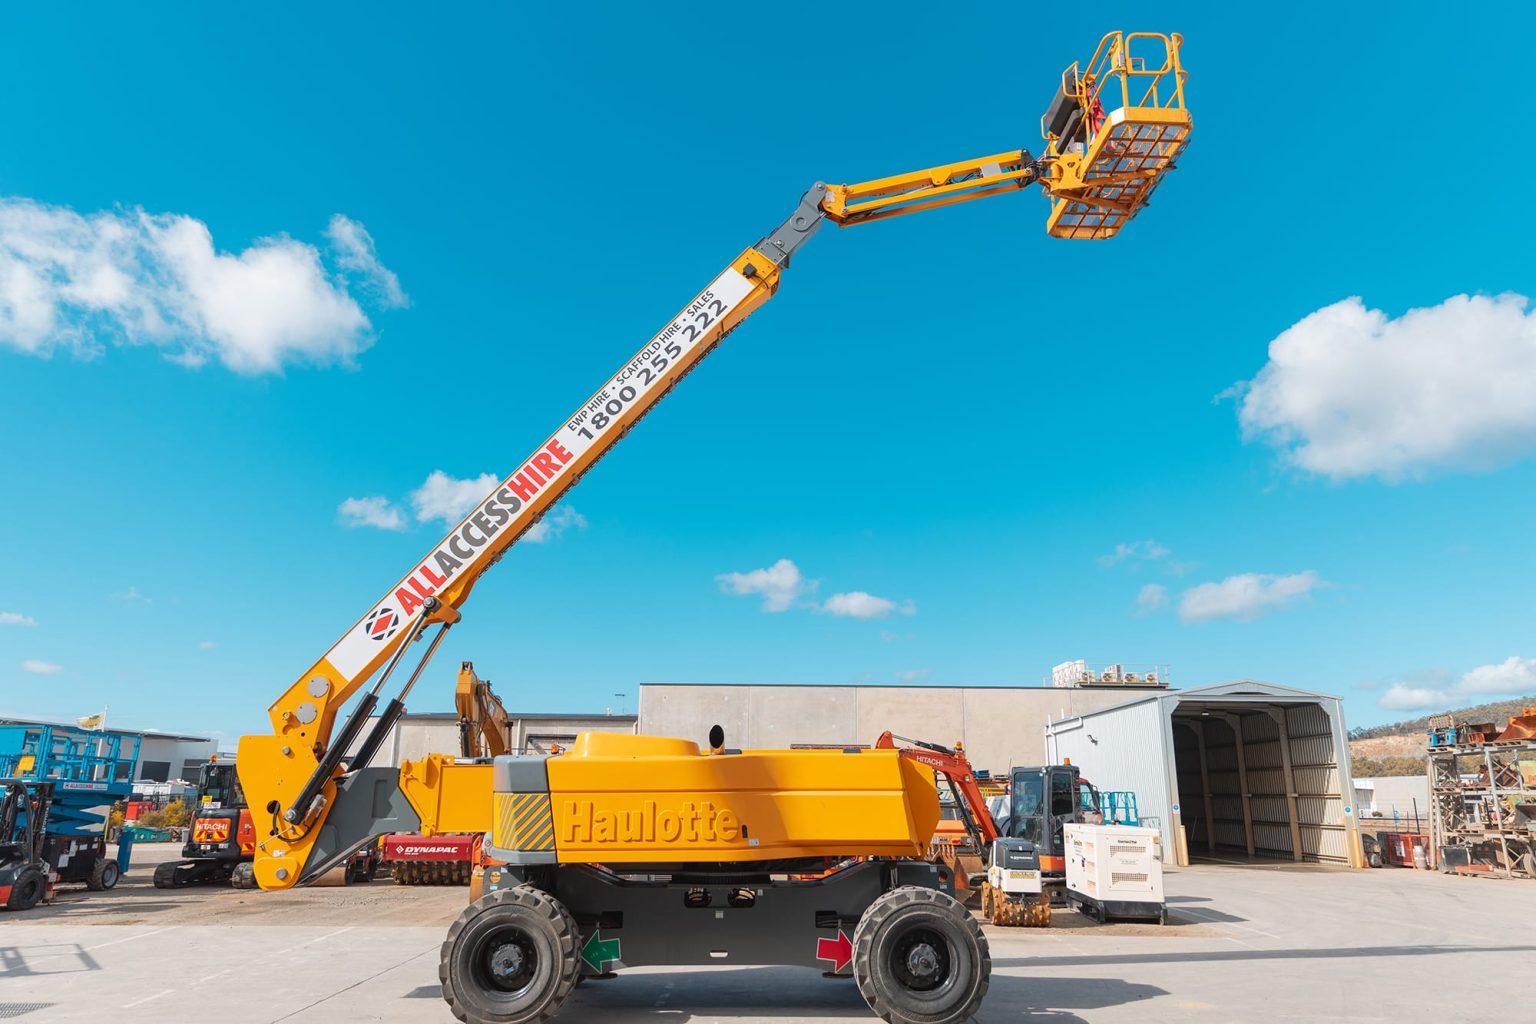 Haulotte Boom Lift Hire from All Access Hire